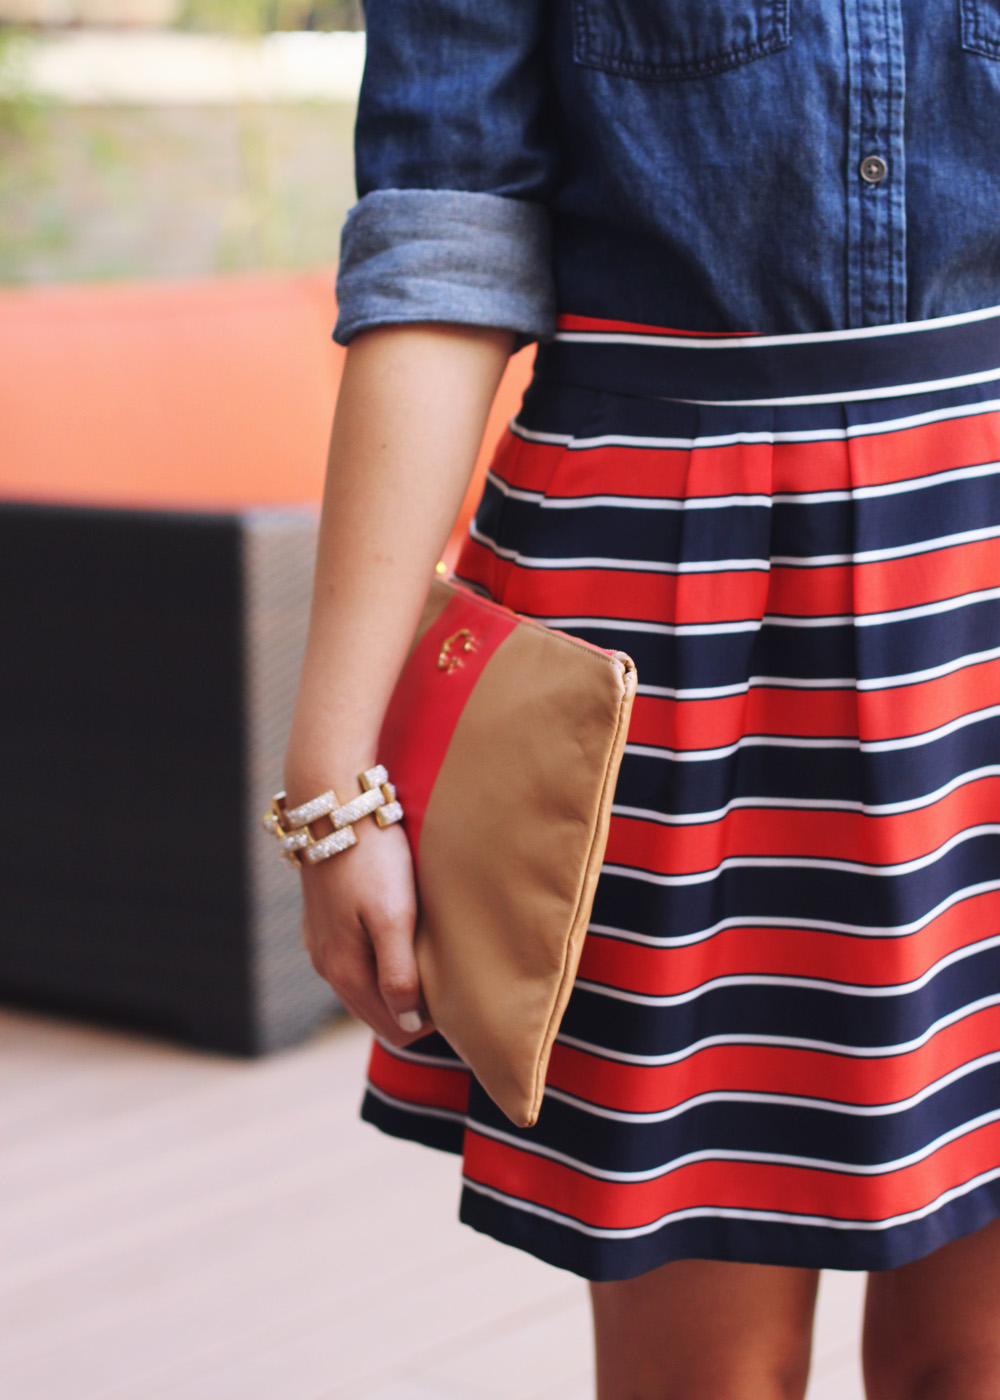 Skirt The Rules Blog; NYC fashion blogger; style blog; fall outfit photos; Banana Republic dark chambray denim shirt; J.Crew Factory red and navy striped skirt; J.Crew square pave link bracelet; C. Wonder camel and red striped clutch; H&M gold brown captoe shoes